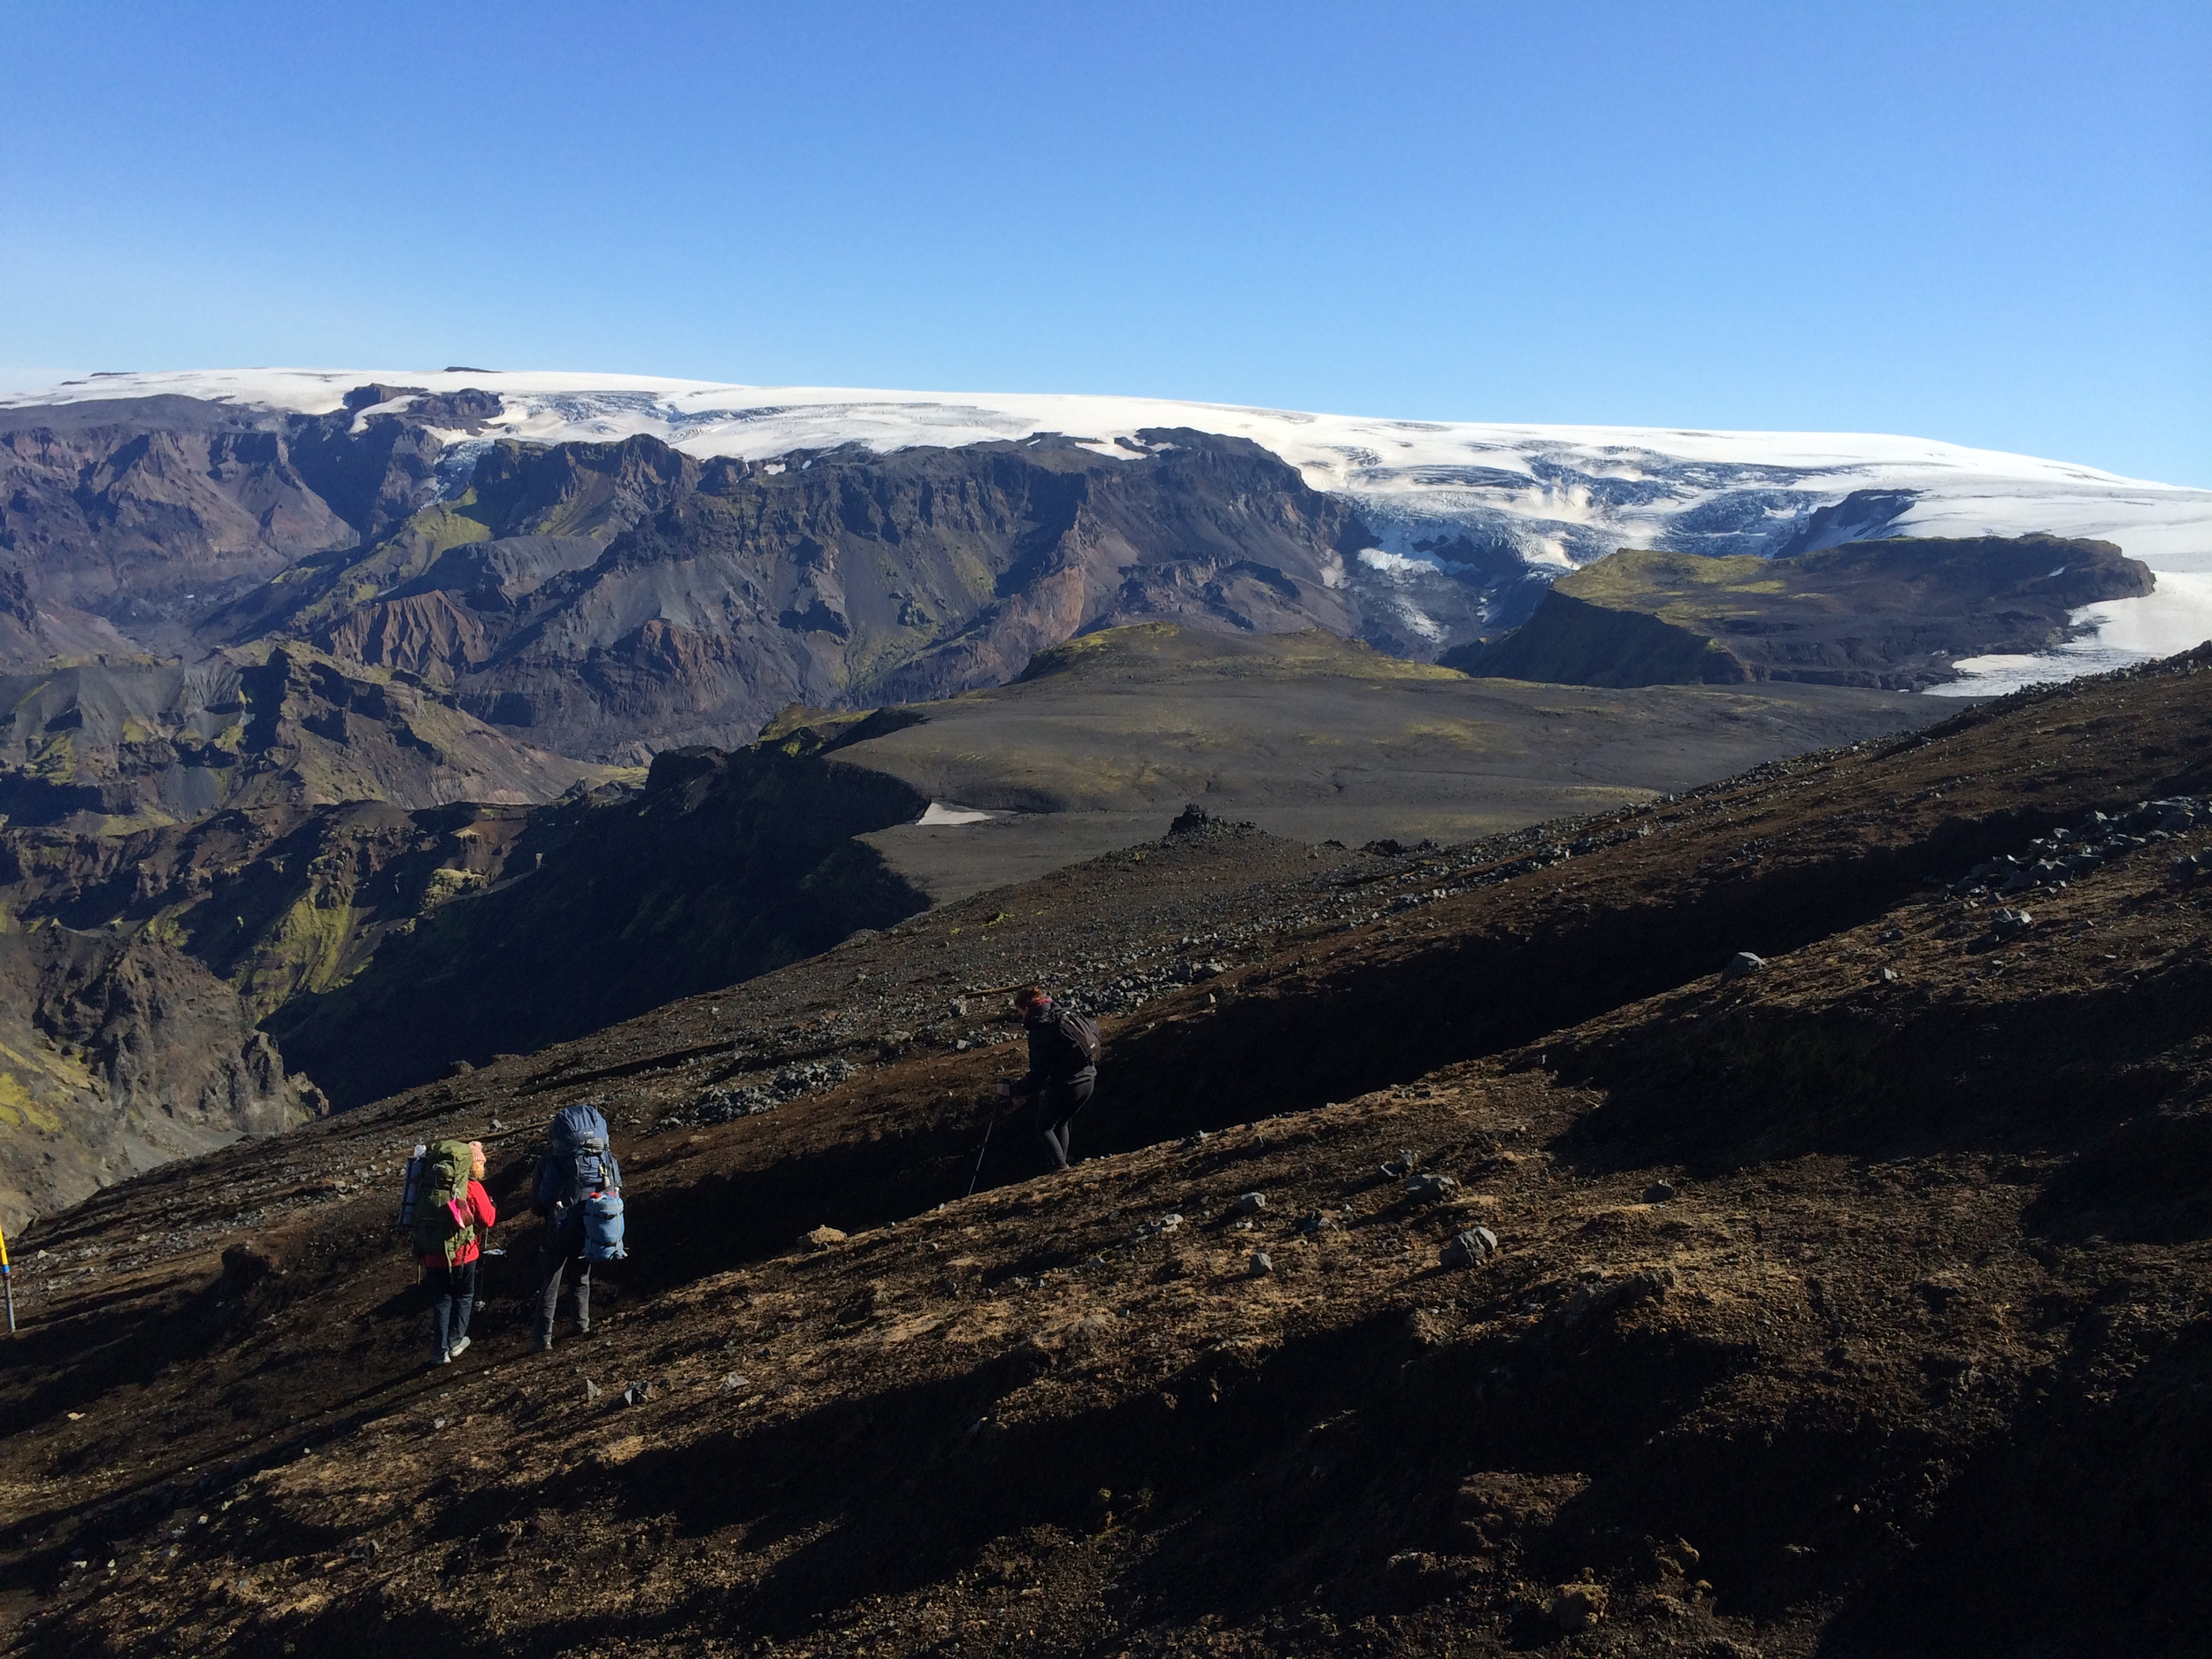 Walk down the mountain and watch the Eyjafjallajökull